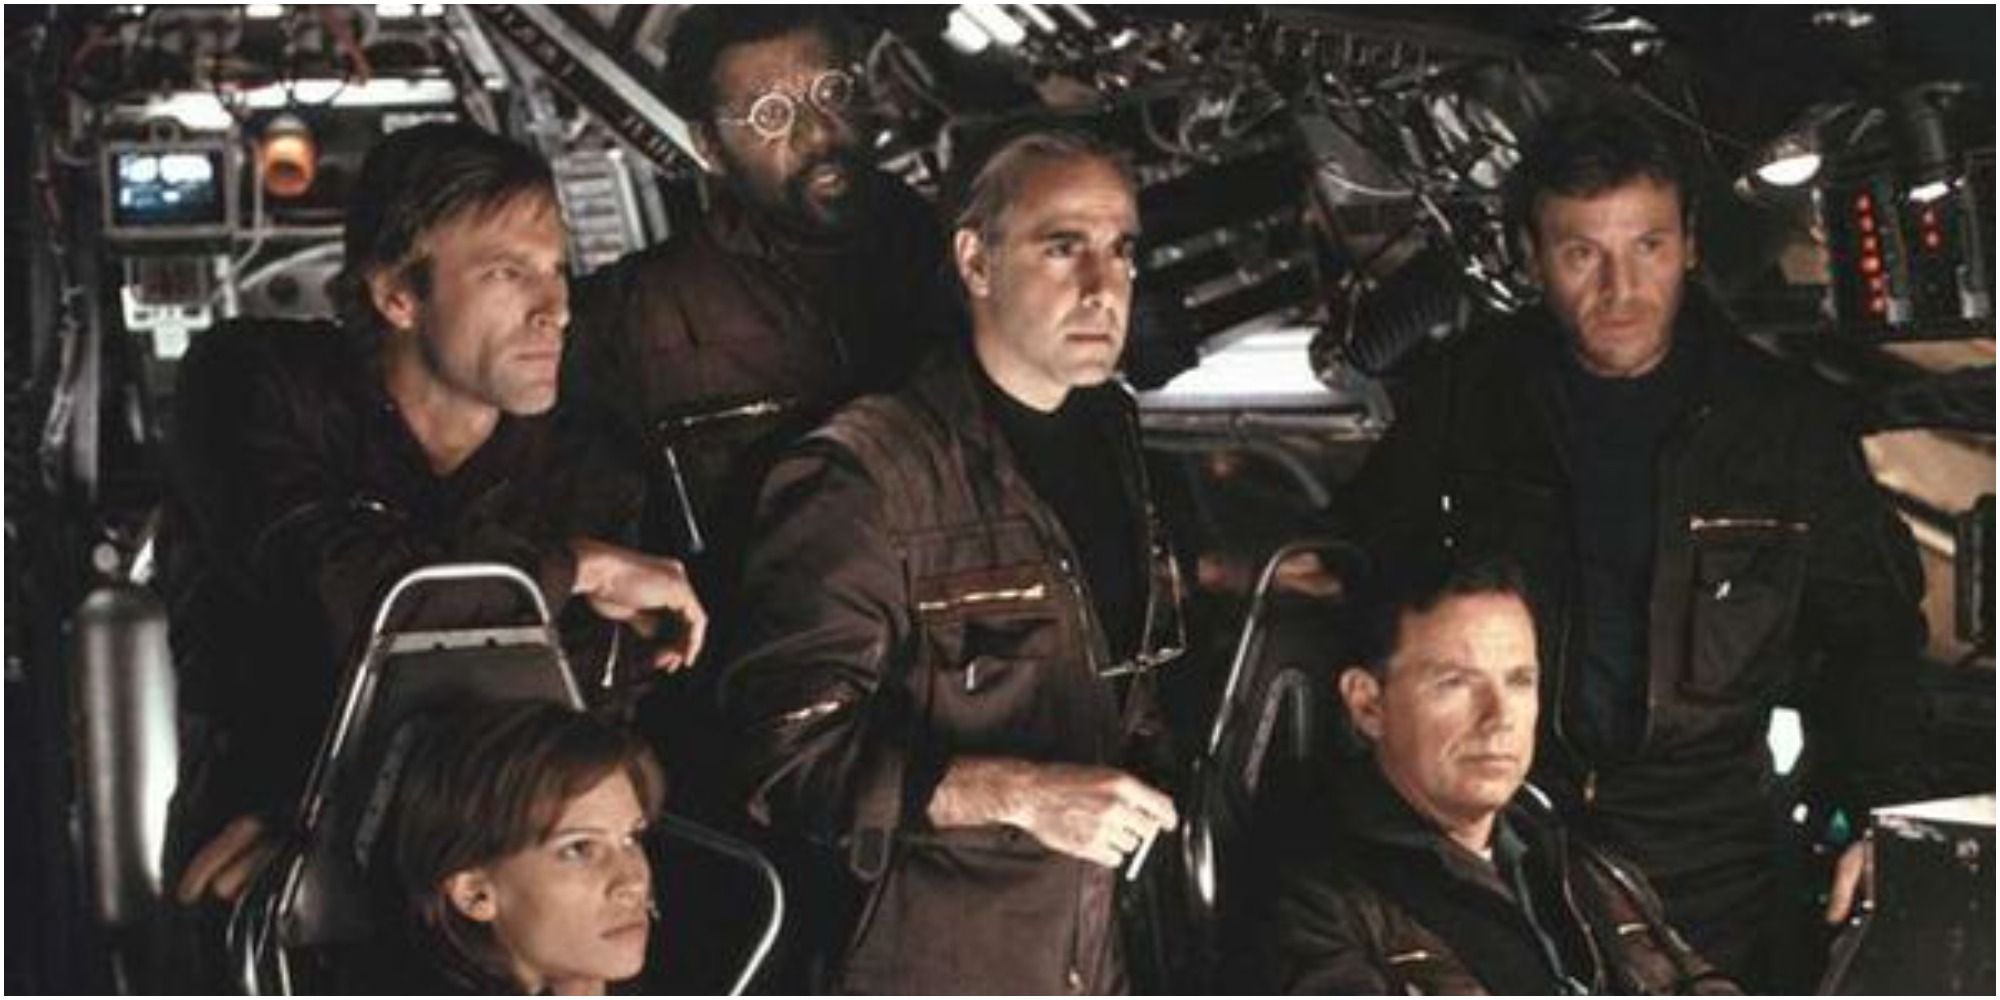 The scientists stand in the cockpit of the ship in The Core